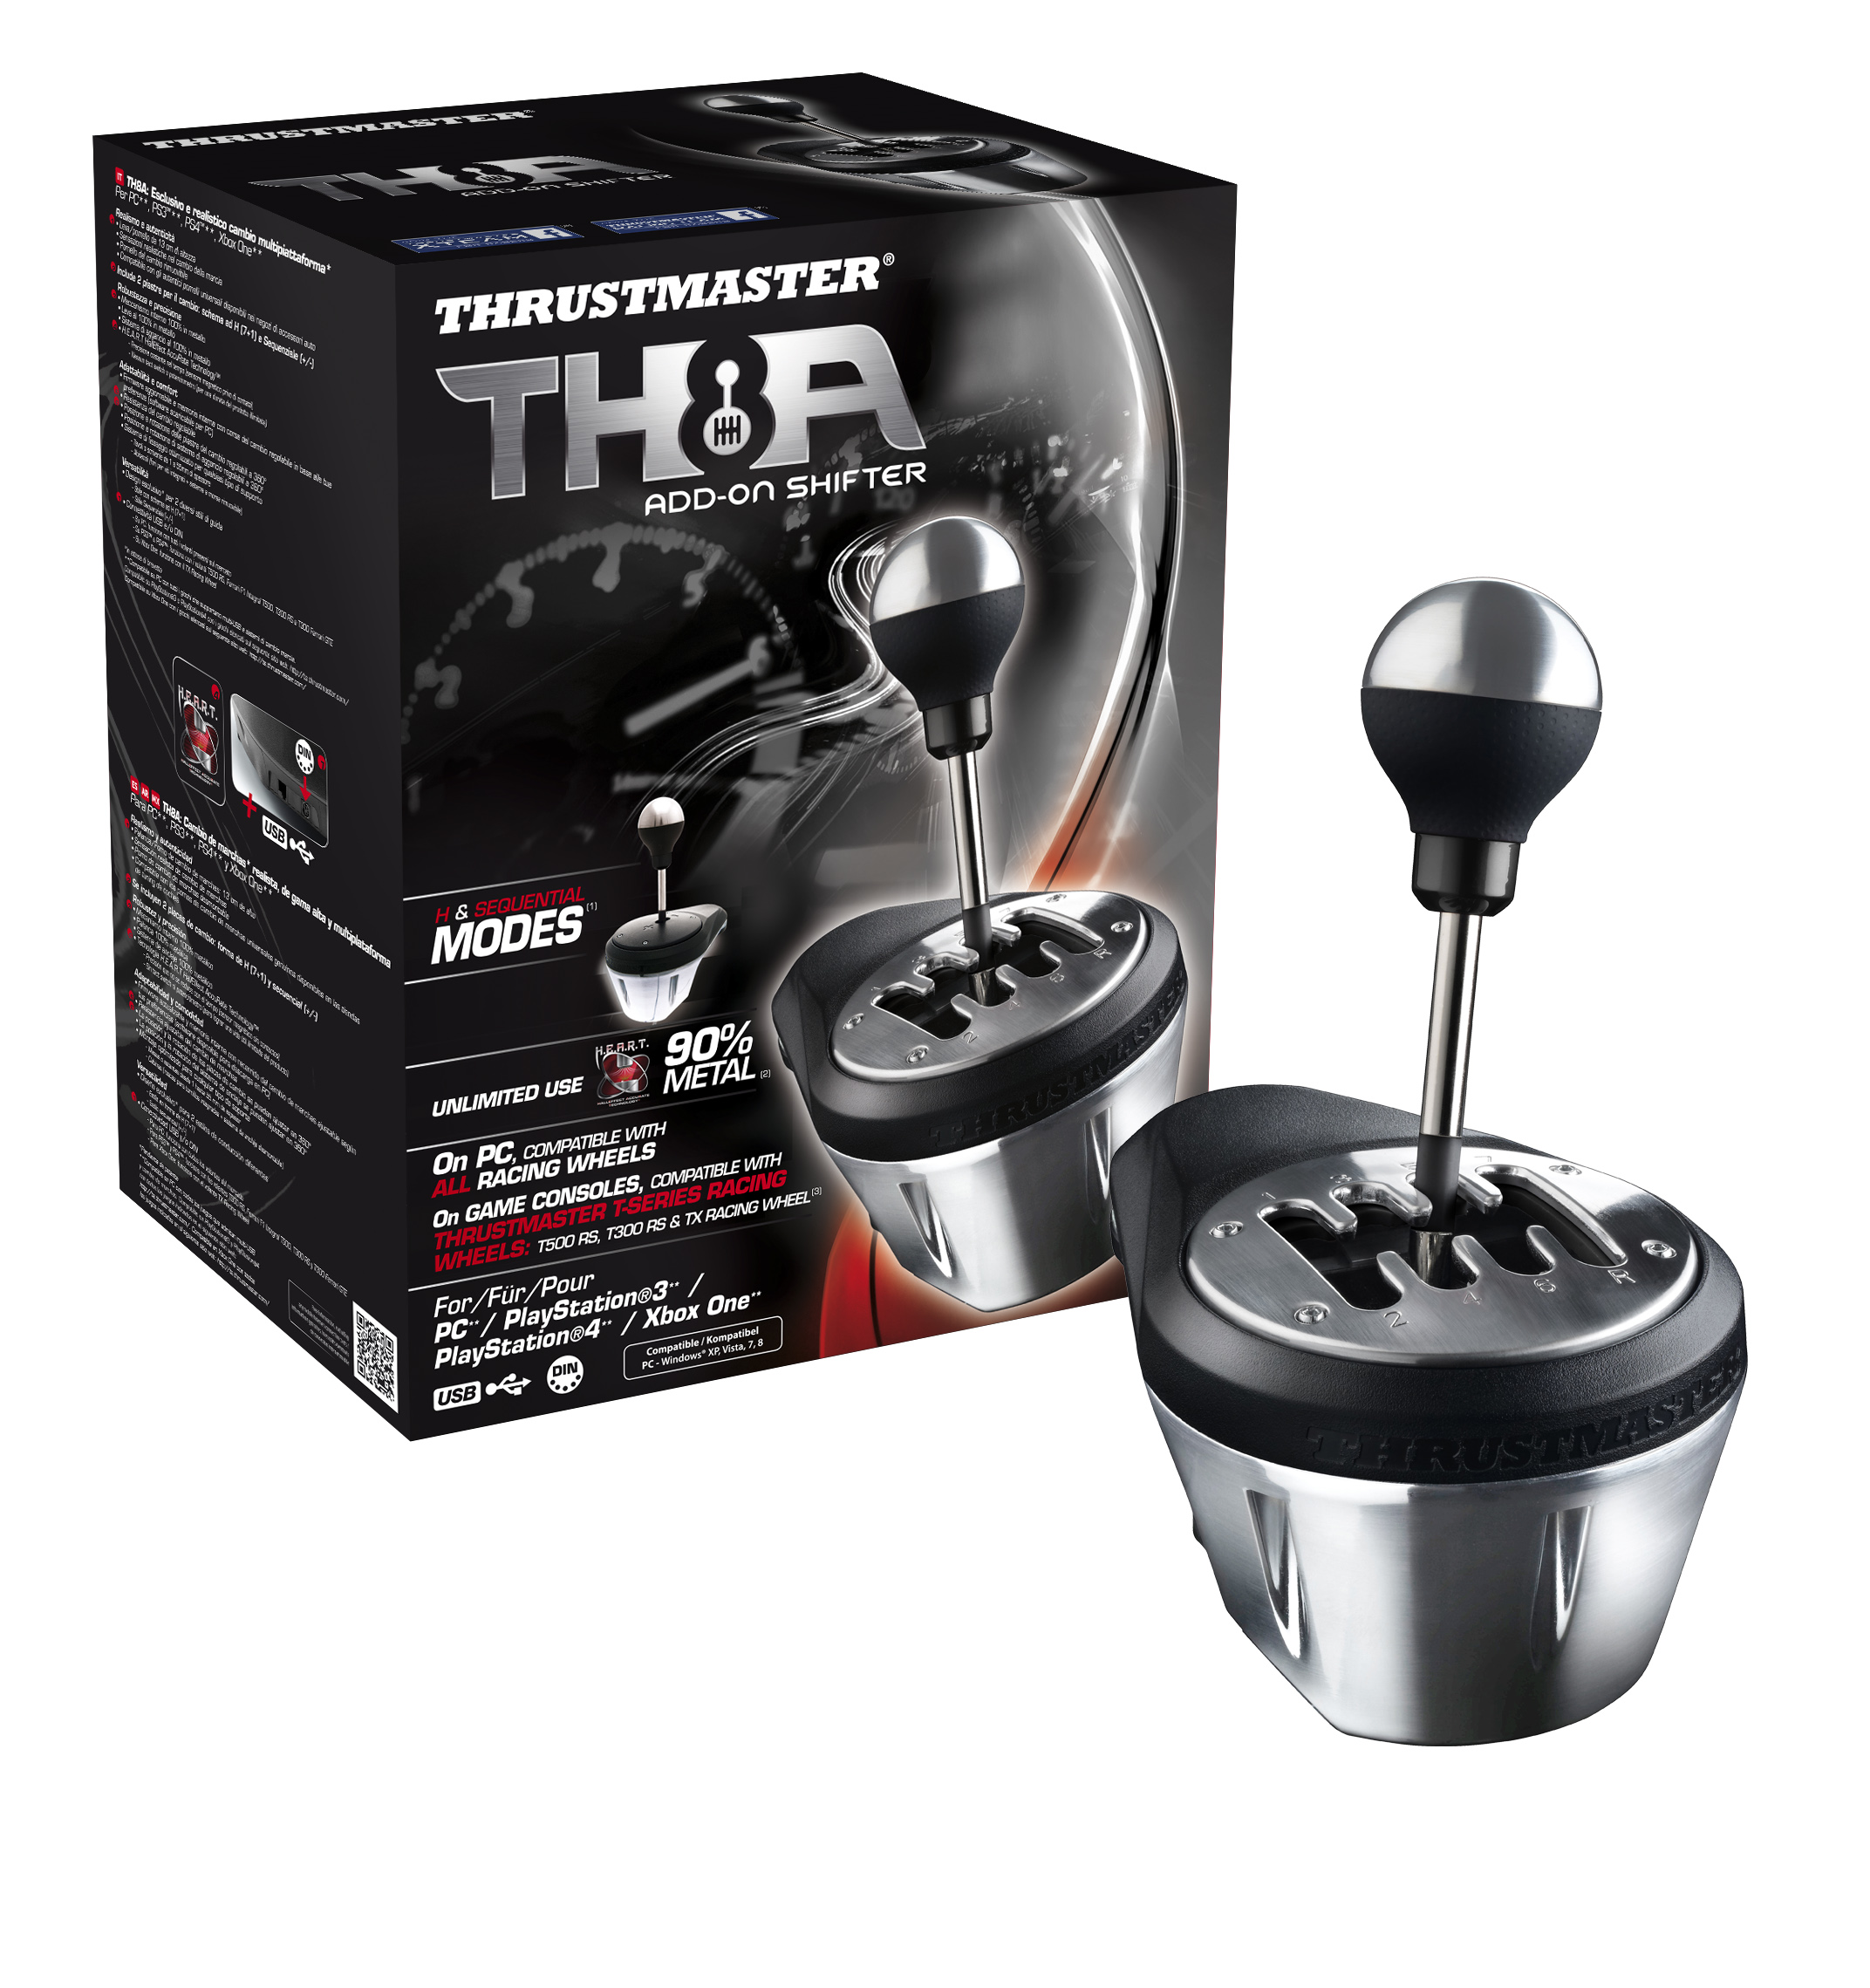 Thrustmaster TH8A Add-on Shifter for PS4 PS3 Xbox and PC | Modern 